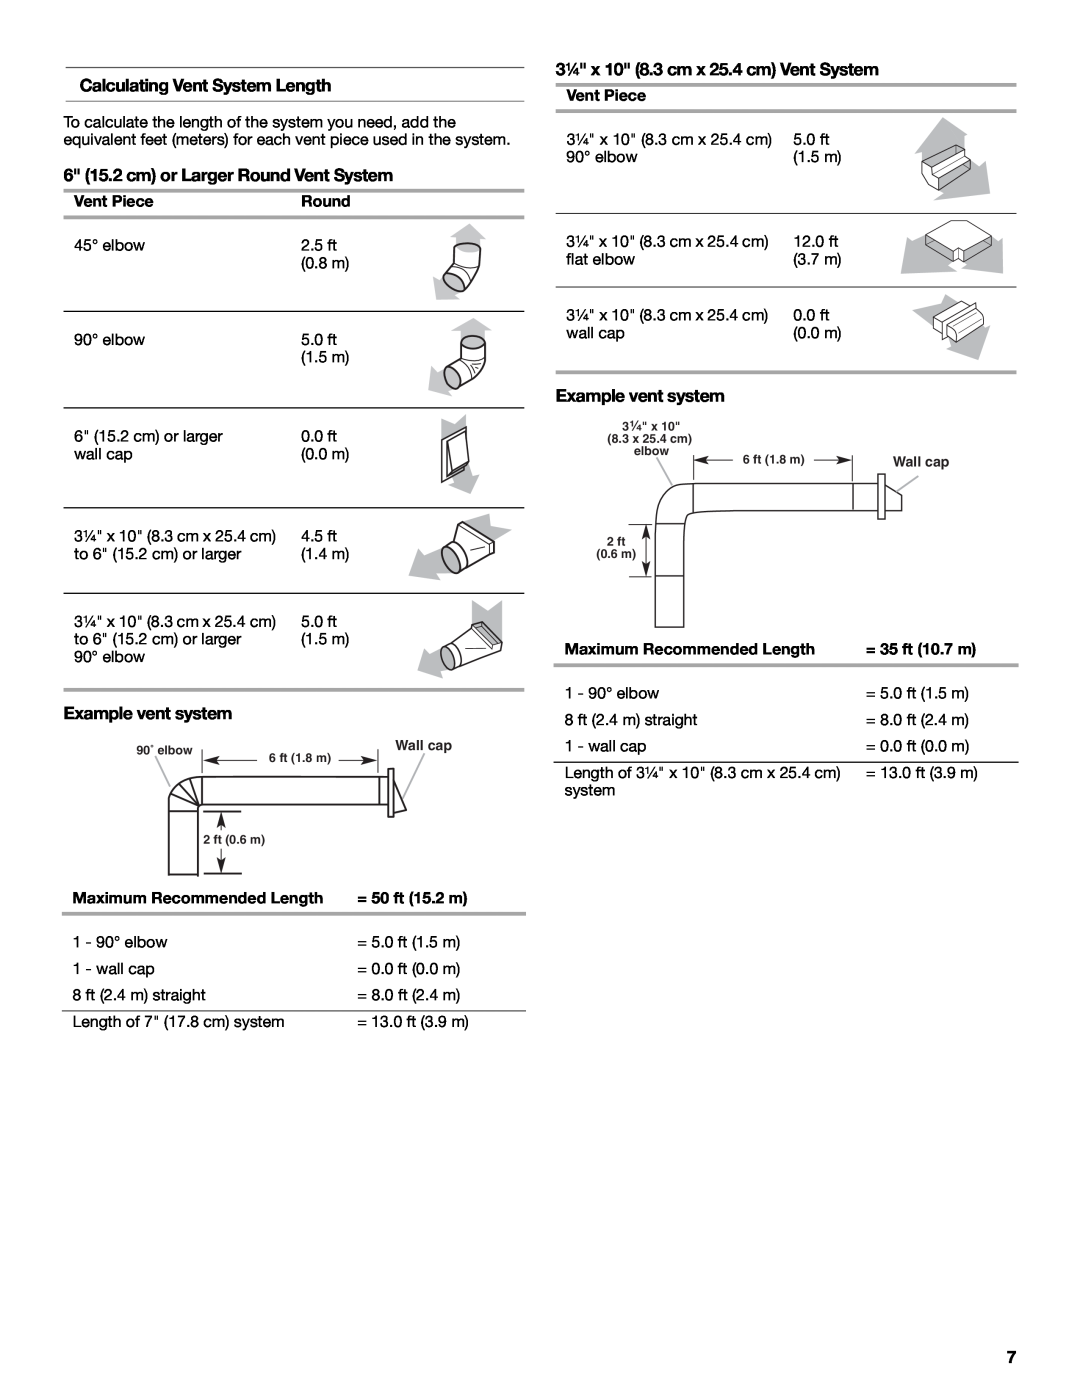 KitchenAid LI3ZGC/W10320581E Calculating Vent System Length, 6 15.2 cm or Larger Round Vent System, Example vent system 